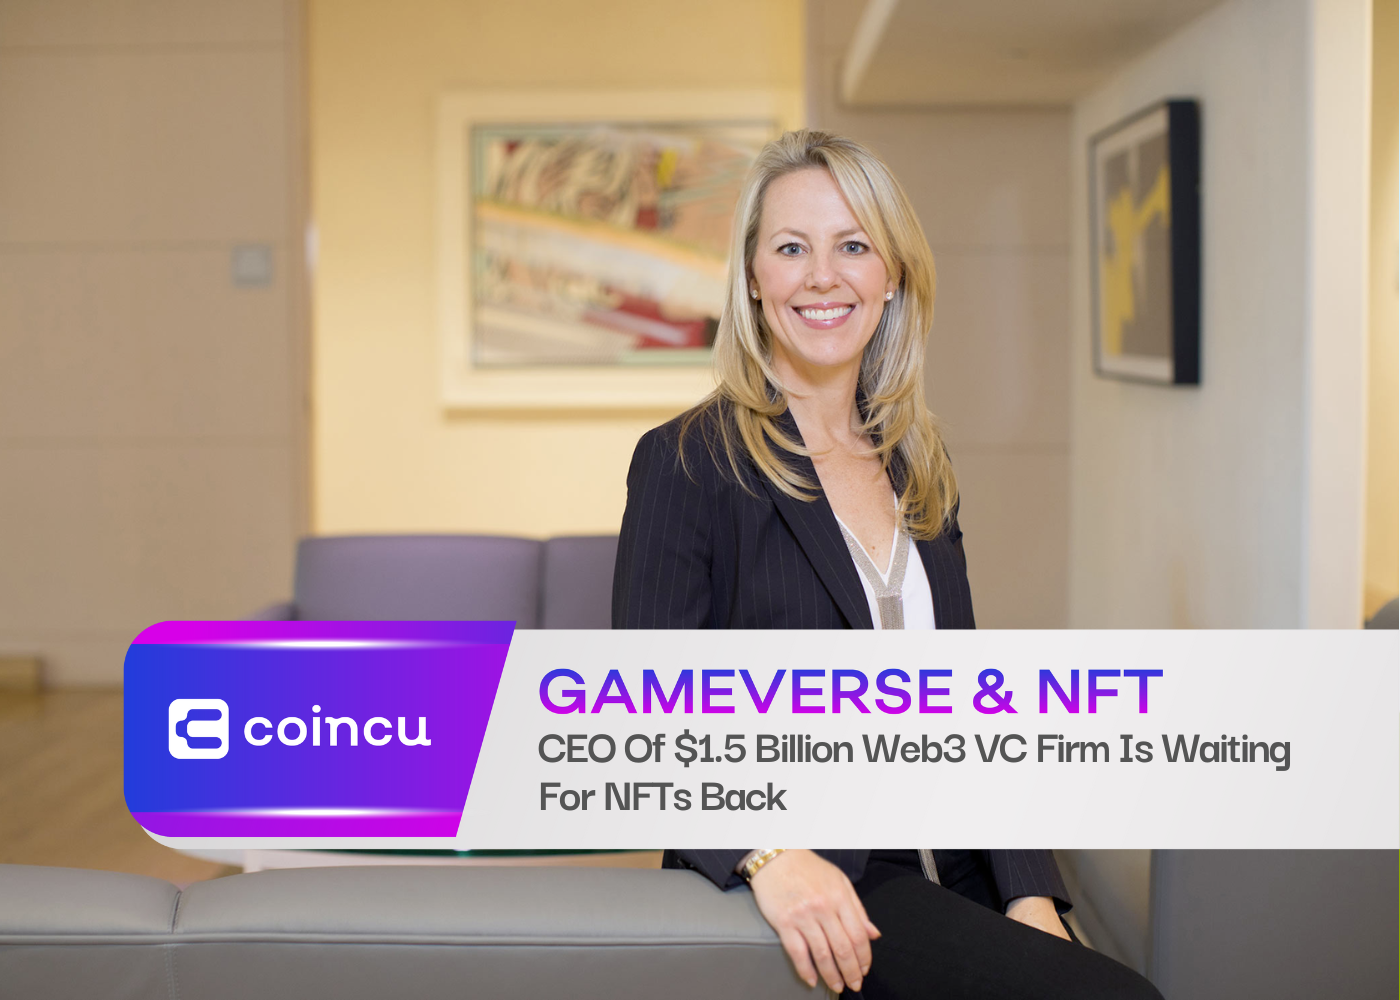 CEO Of $1.5 Billion Web3 VC Firm Is Waiting For NFTs Back